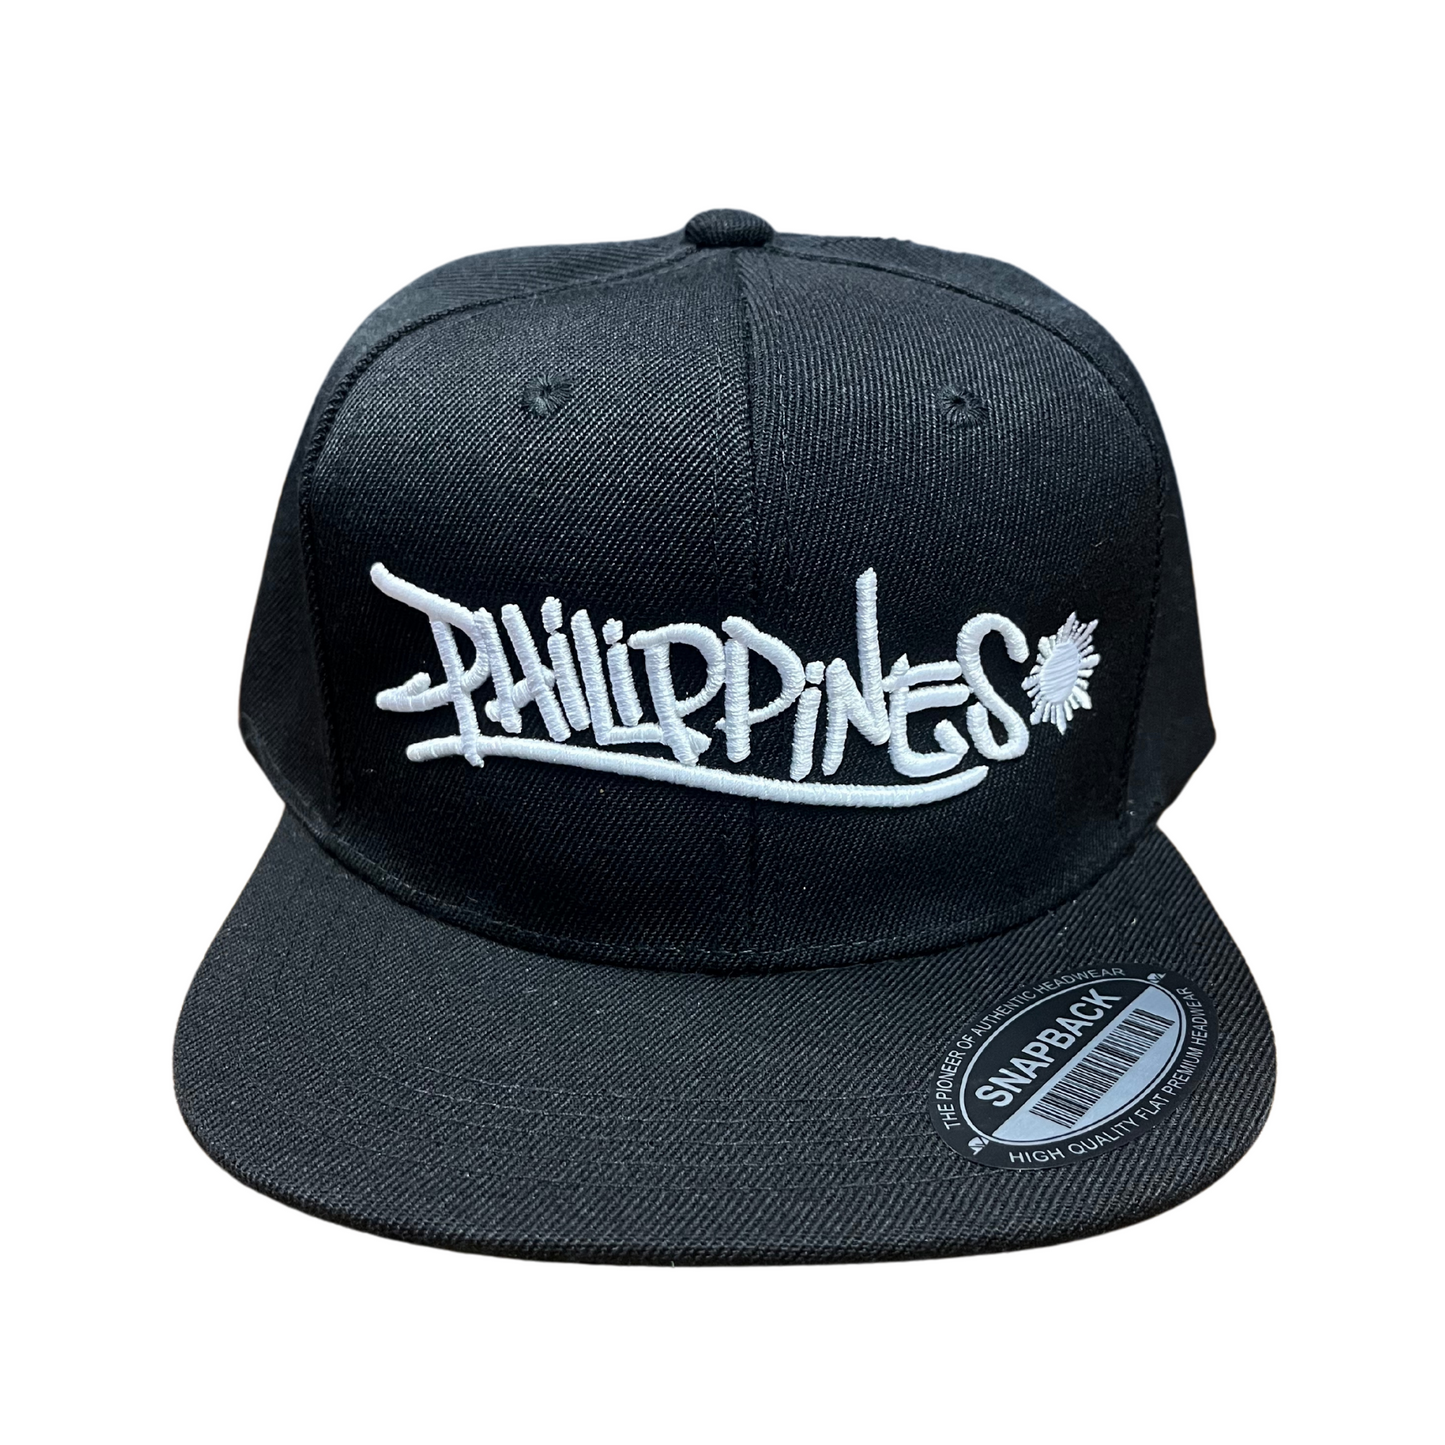 Philippines Graffiti Black Hat With White Embroidery